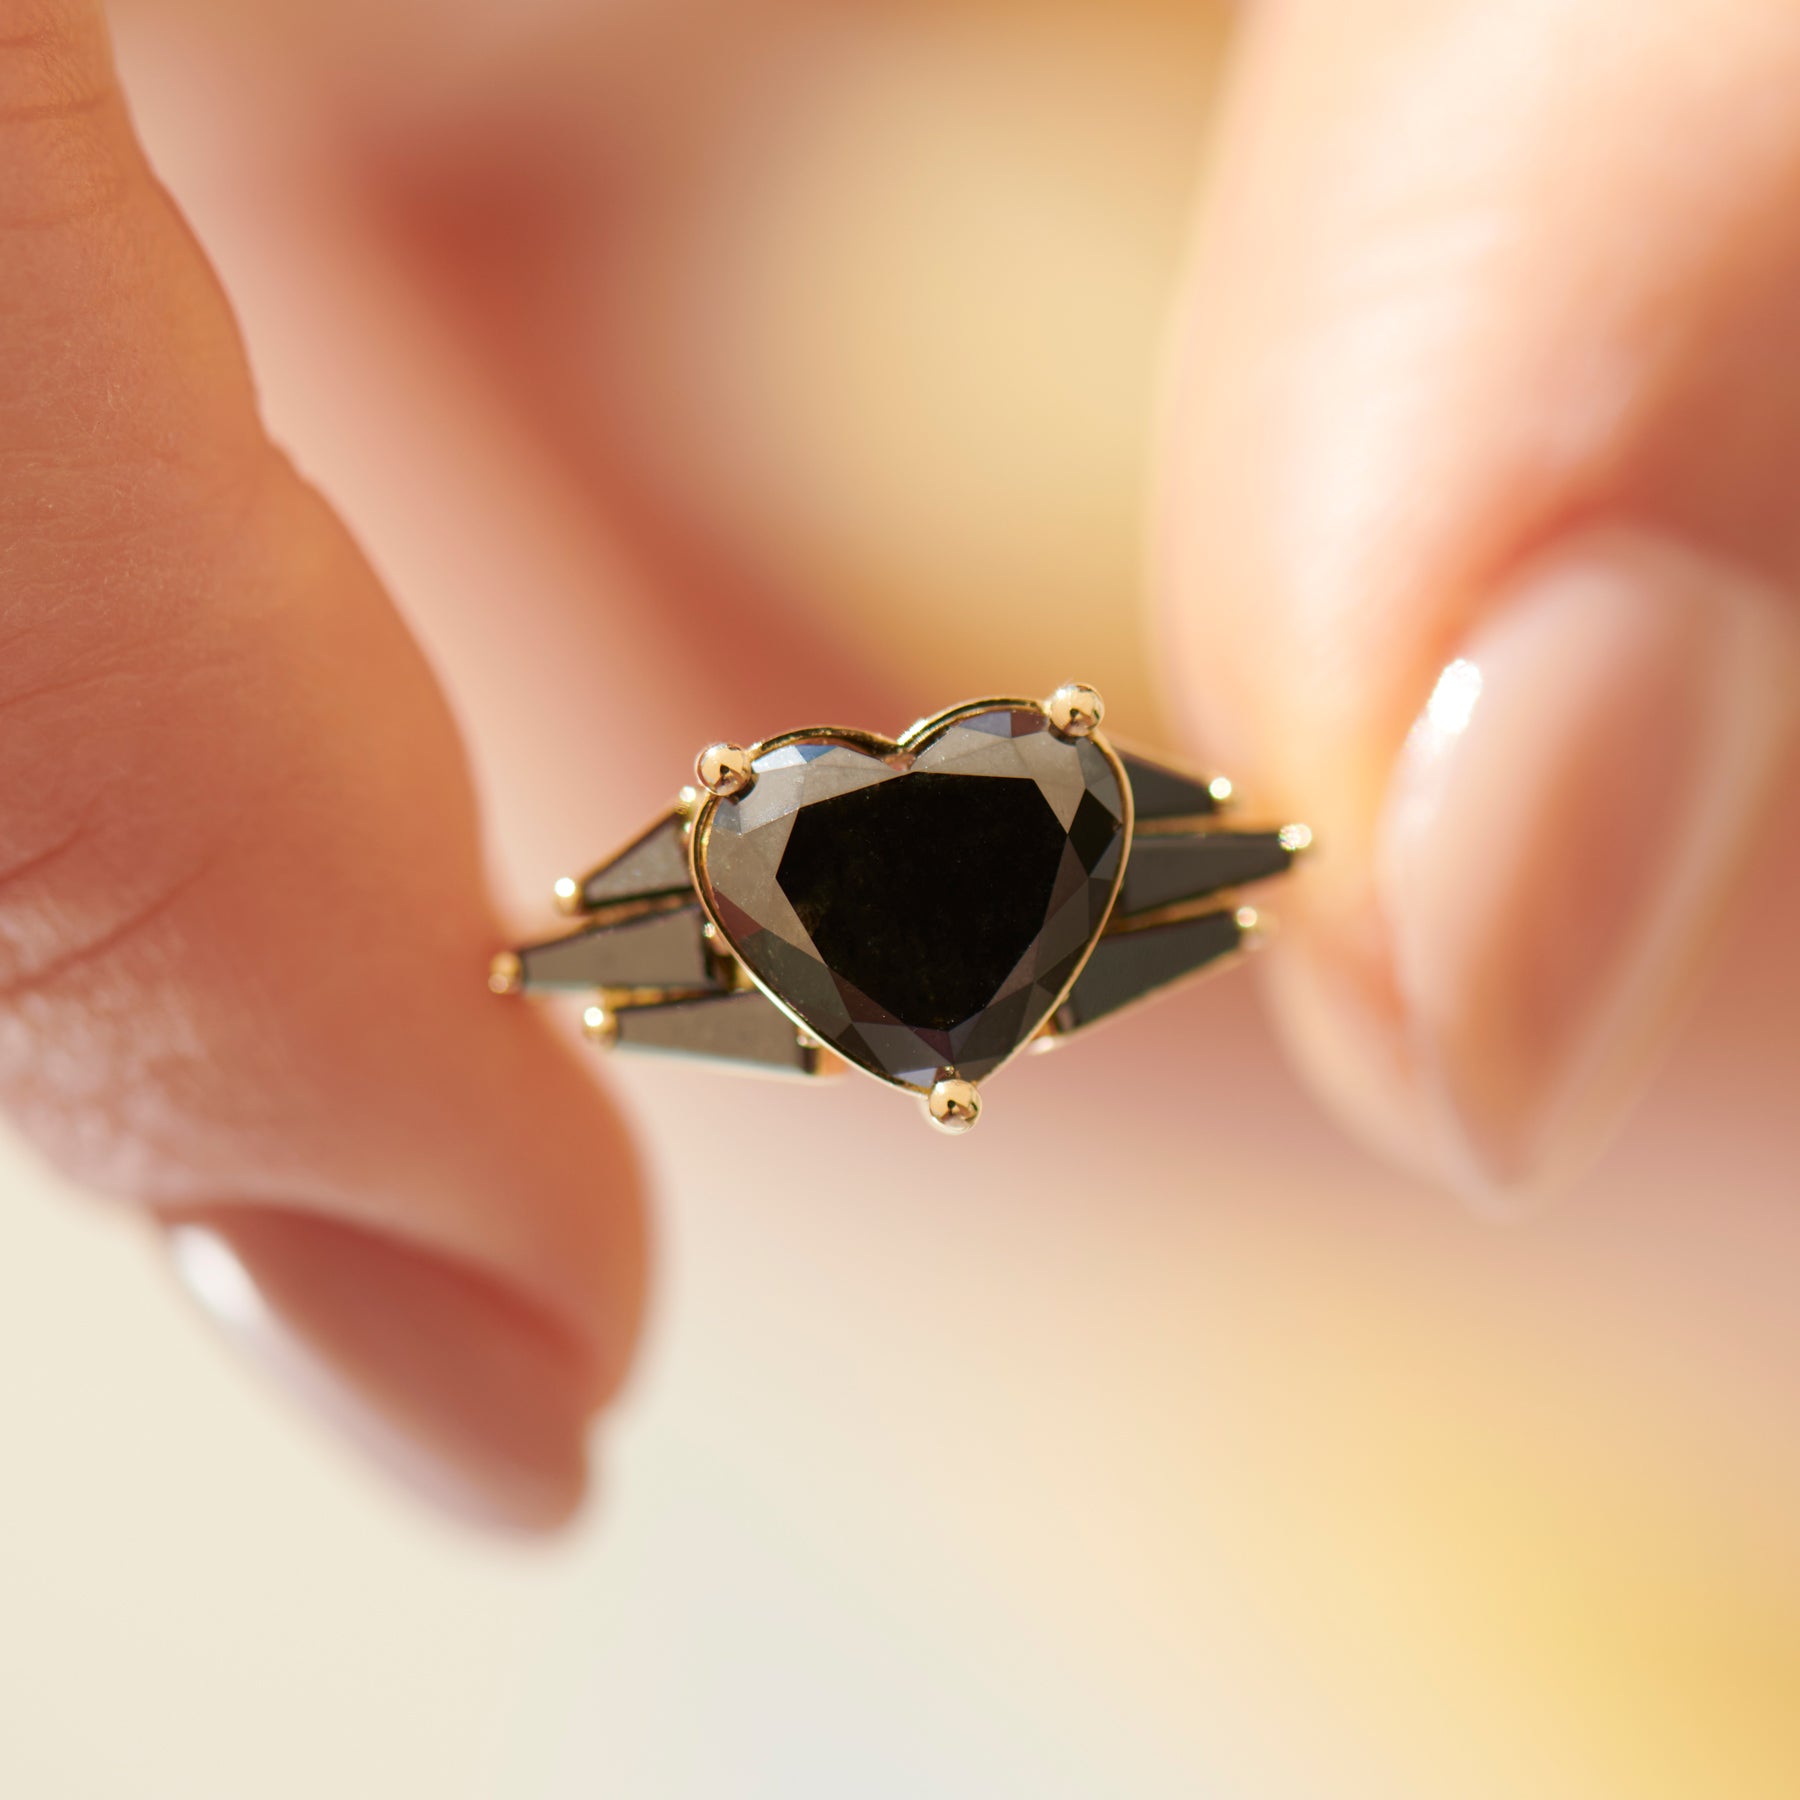 Antique Heart Style Black Onyx & Cubic Zirconia Gemstone Silver Ring  Manufacturer, Antique Heart Style Black Onyx & Cubic Zirconia Gemstone  Silver Ring Exporter, Supplier